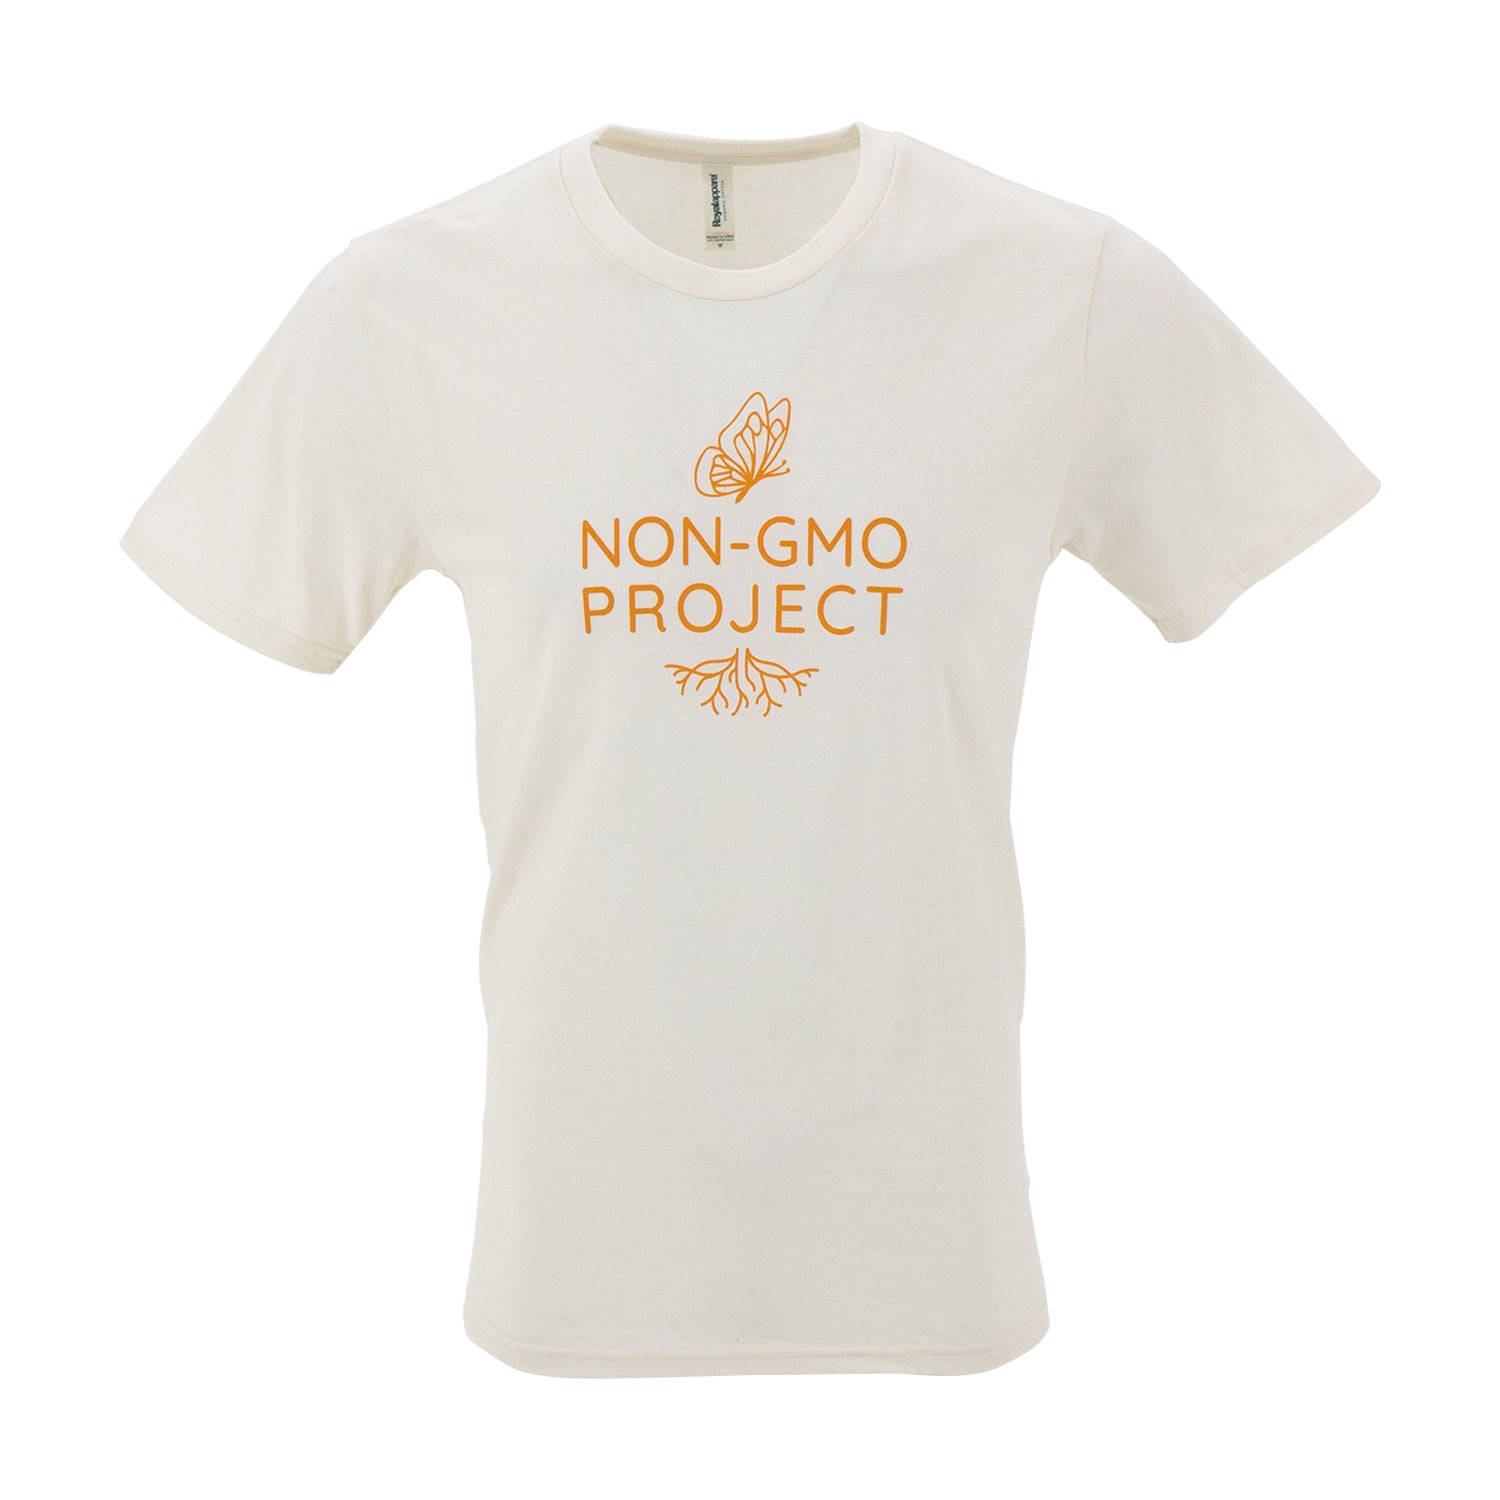  Non-GMO Project t-shirt front with orange "Non-GMO Project", butterfly, and roots